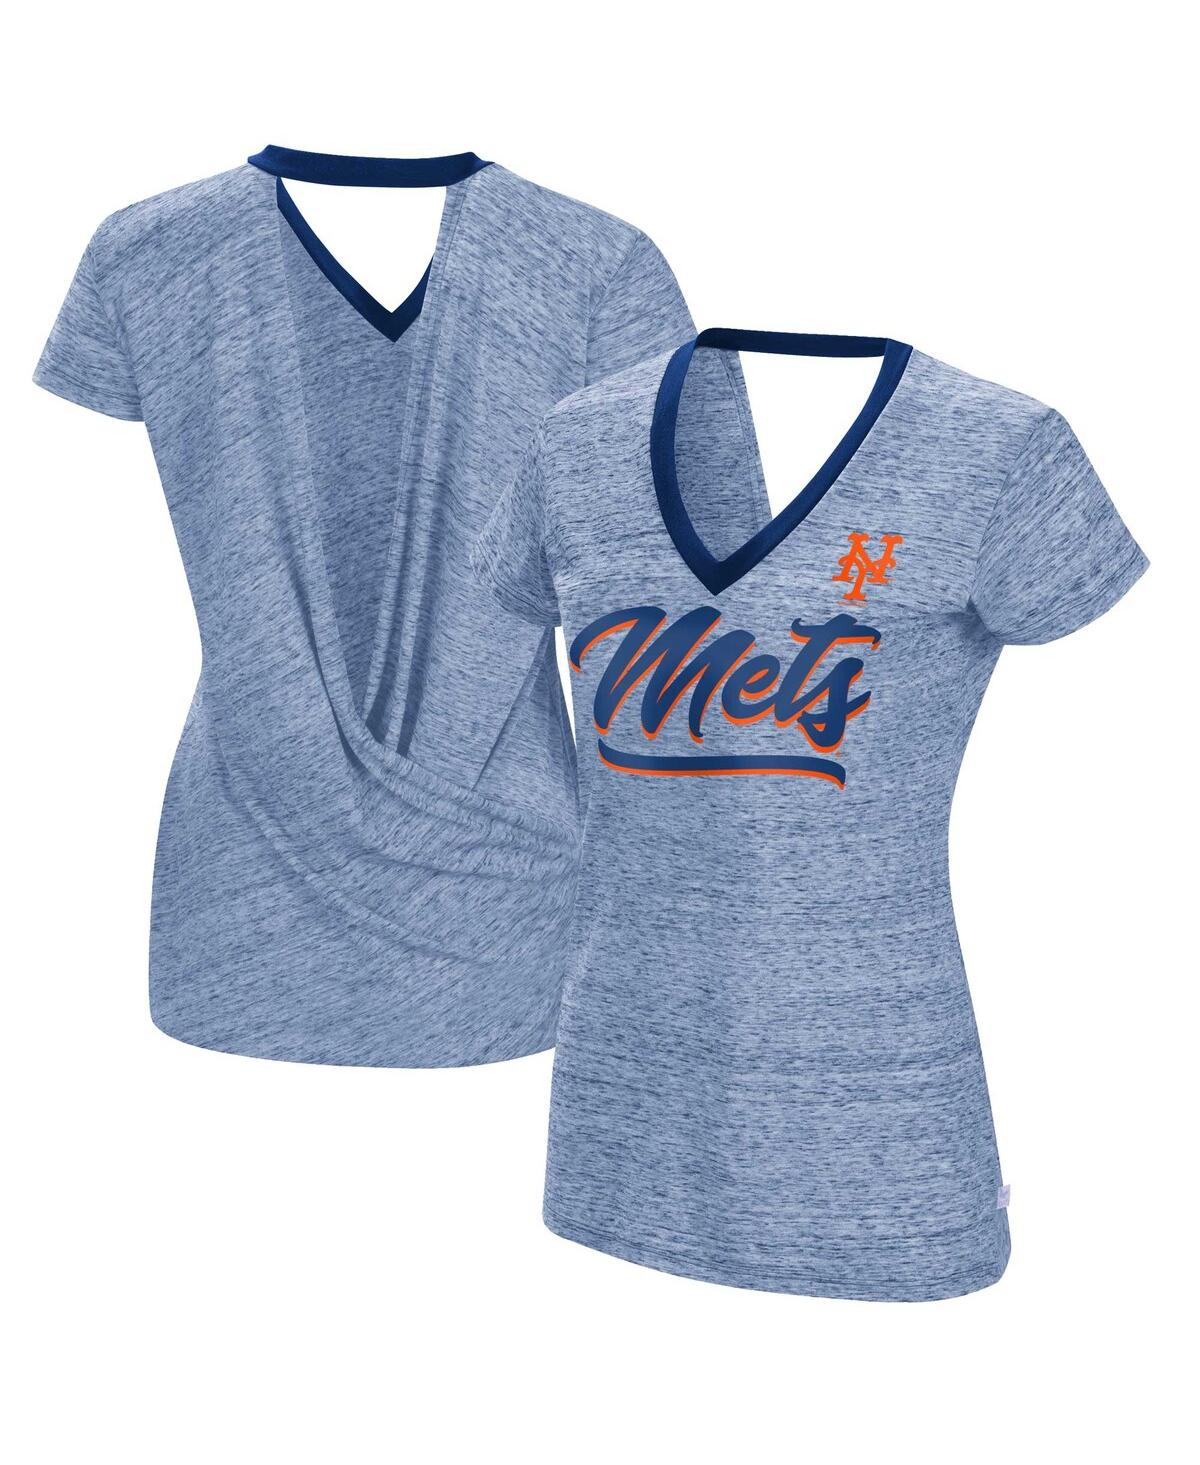 Women's Touch Royal New York Mets Halftime Back Wrap Top V-Neck T-shirt - Royal